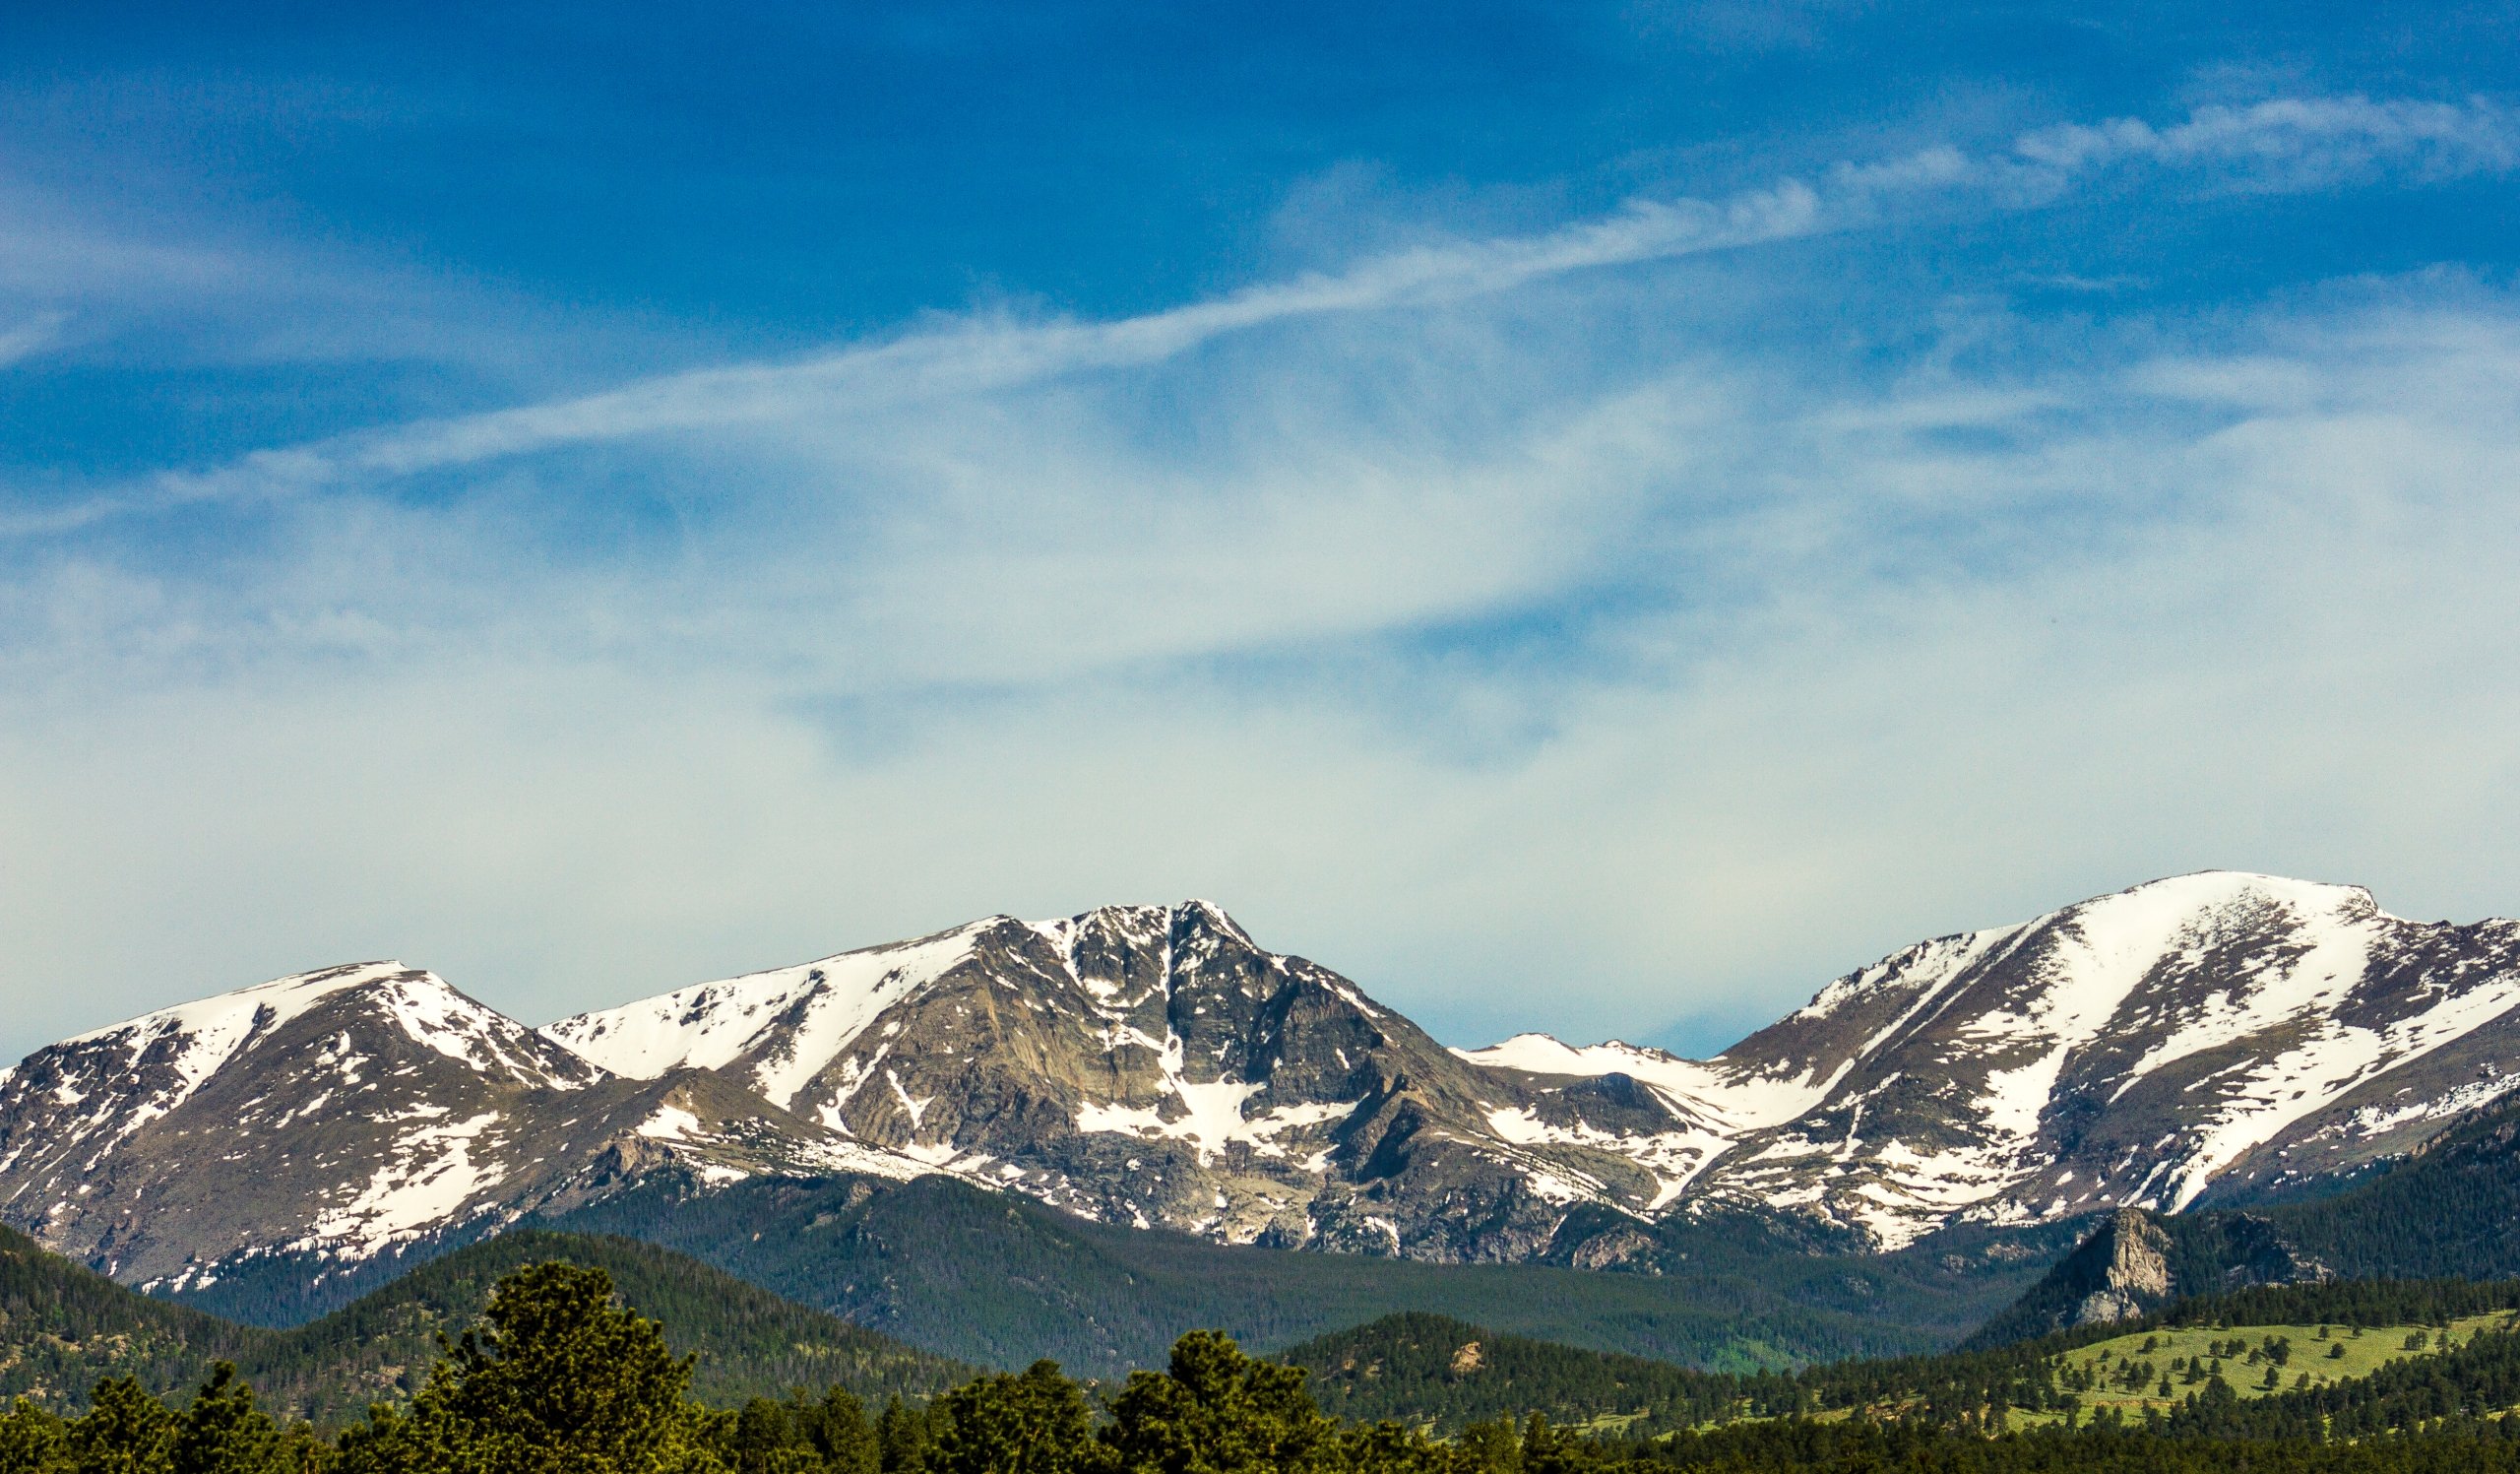 A stock photo of snowy mountains